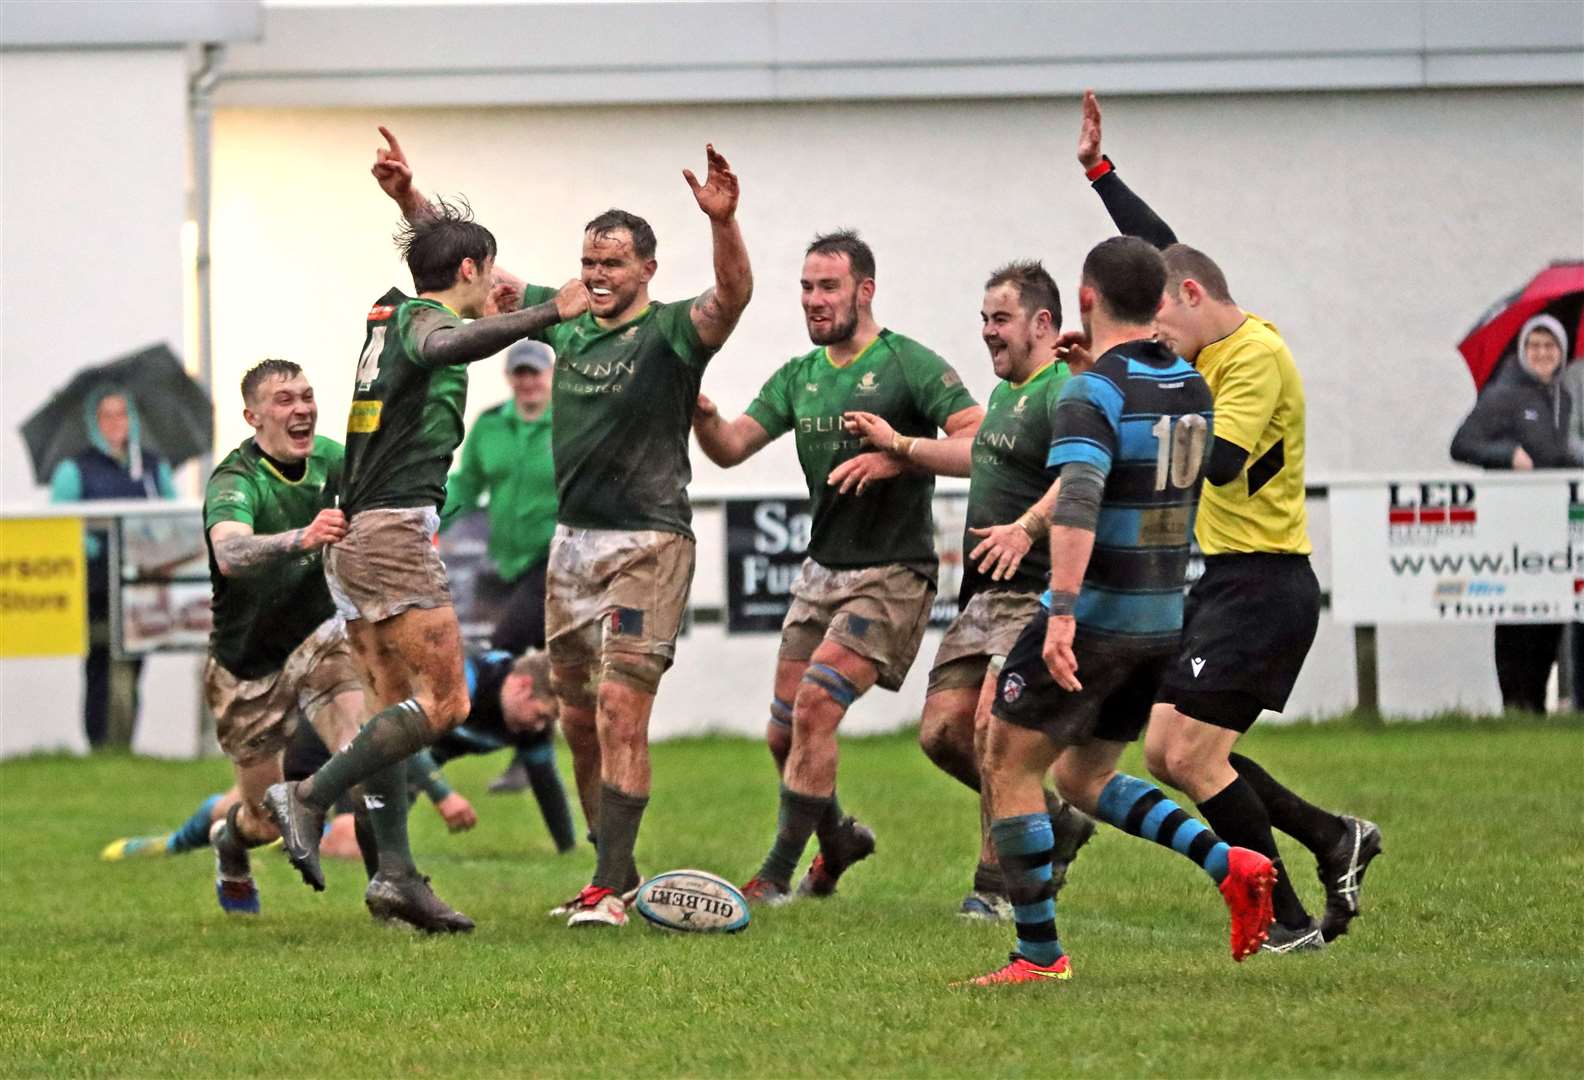 Caithness celebrating a try against Carrick in 2019. Both clubs will step down from National League Division 3. Picture: James Gunn